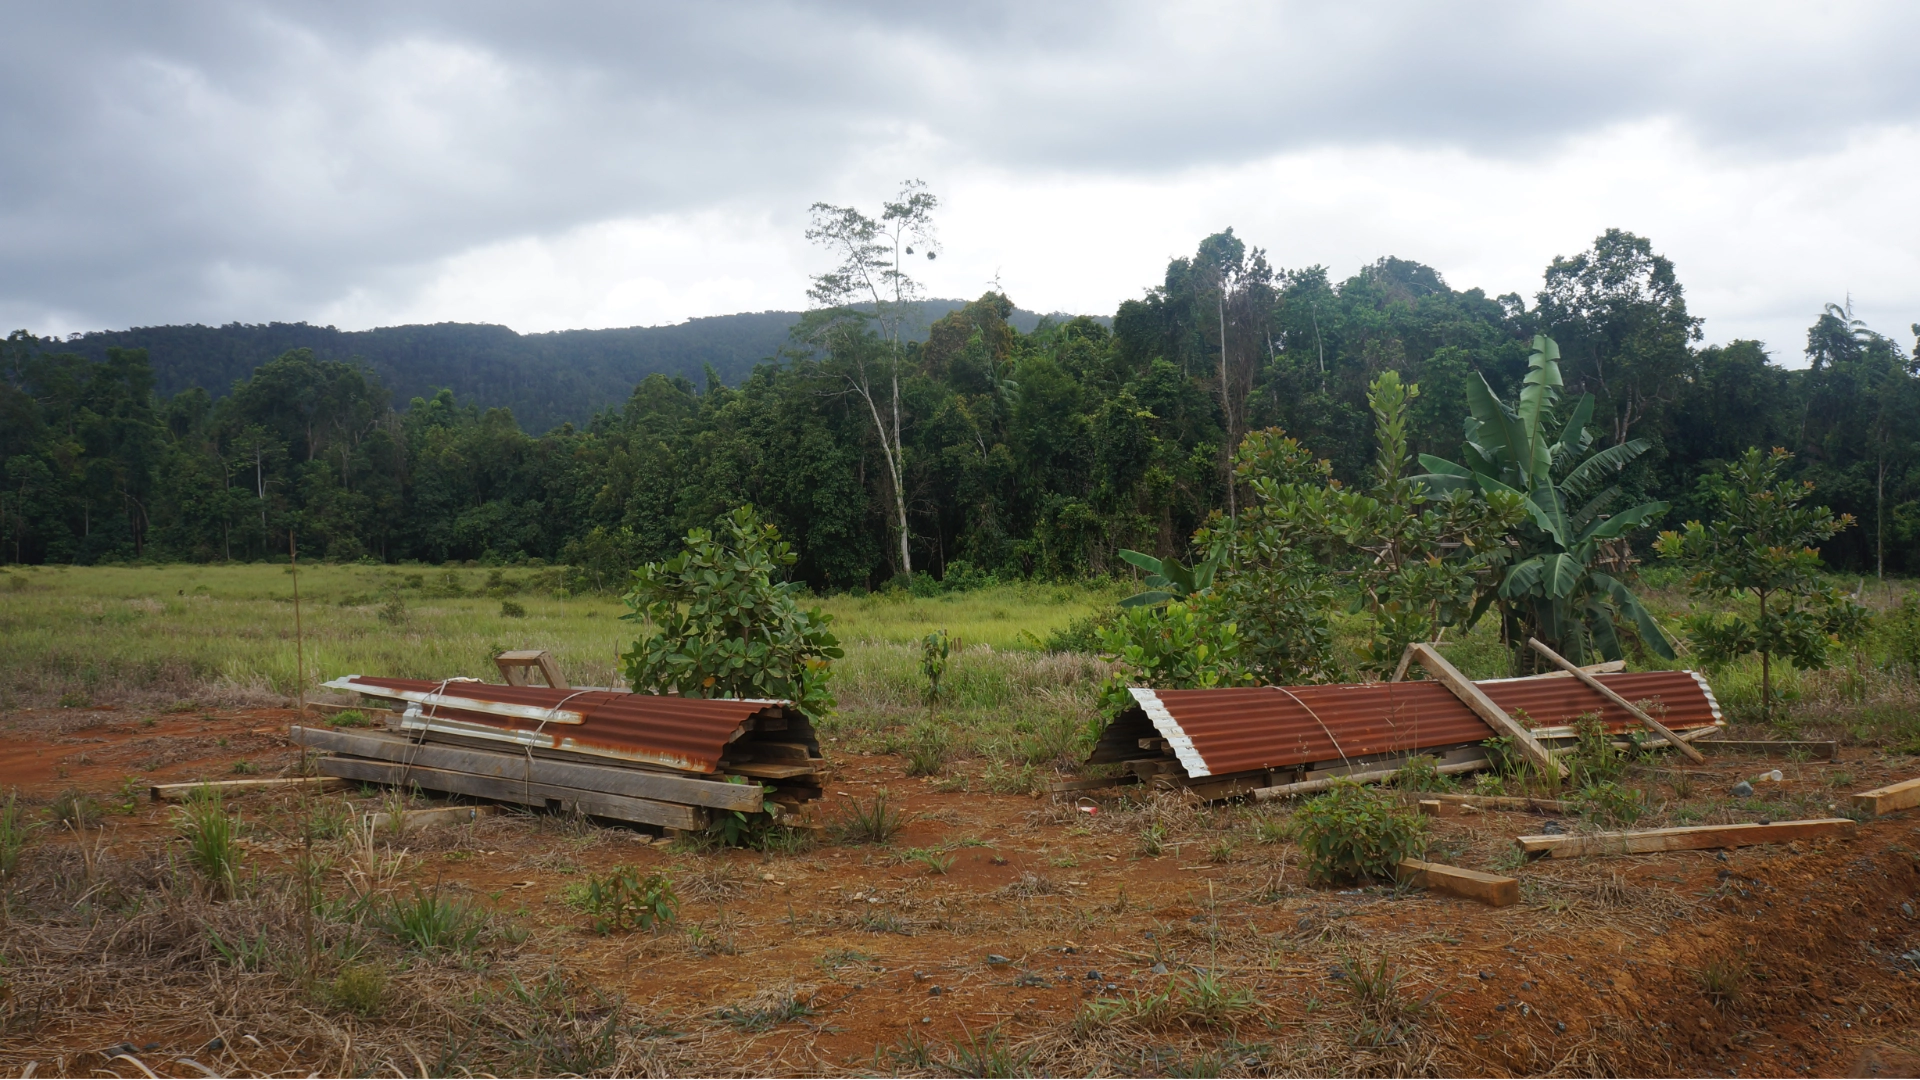 Dismantled shelters on the Mopute people’s traditional land